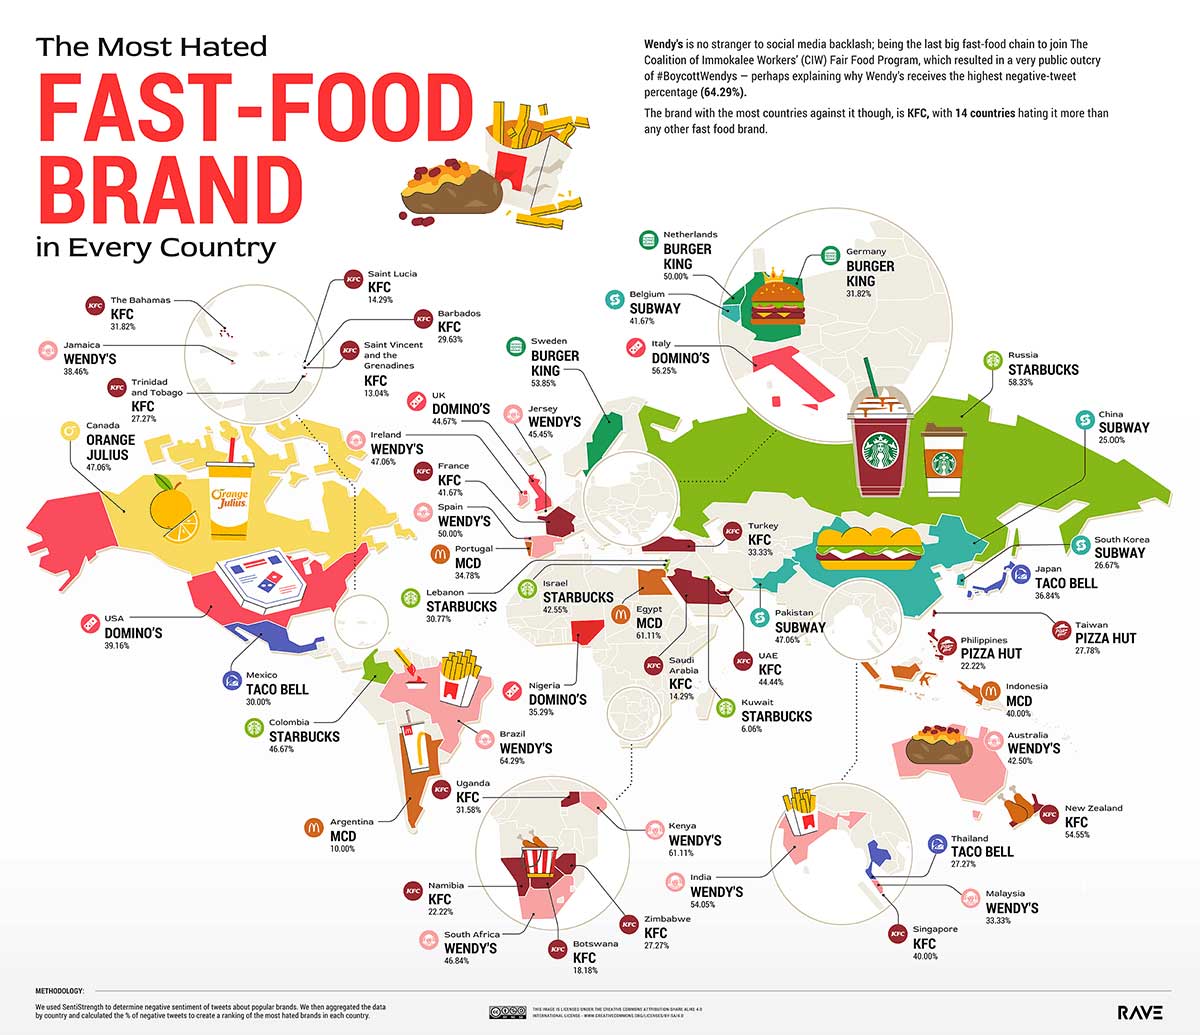 most hated brand - fast food - in every country